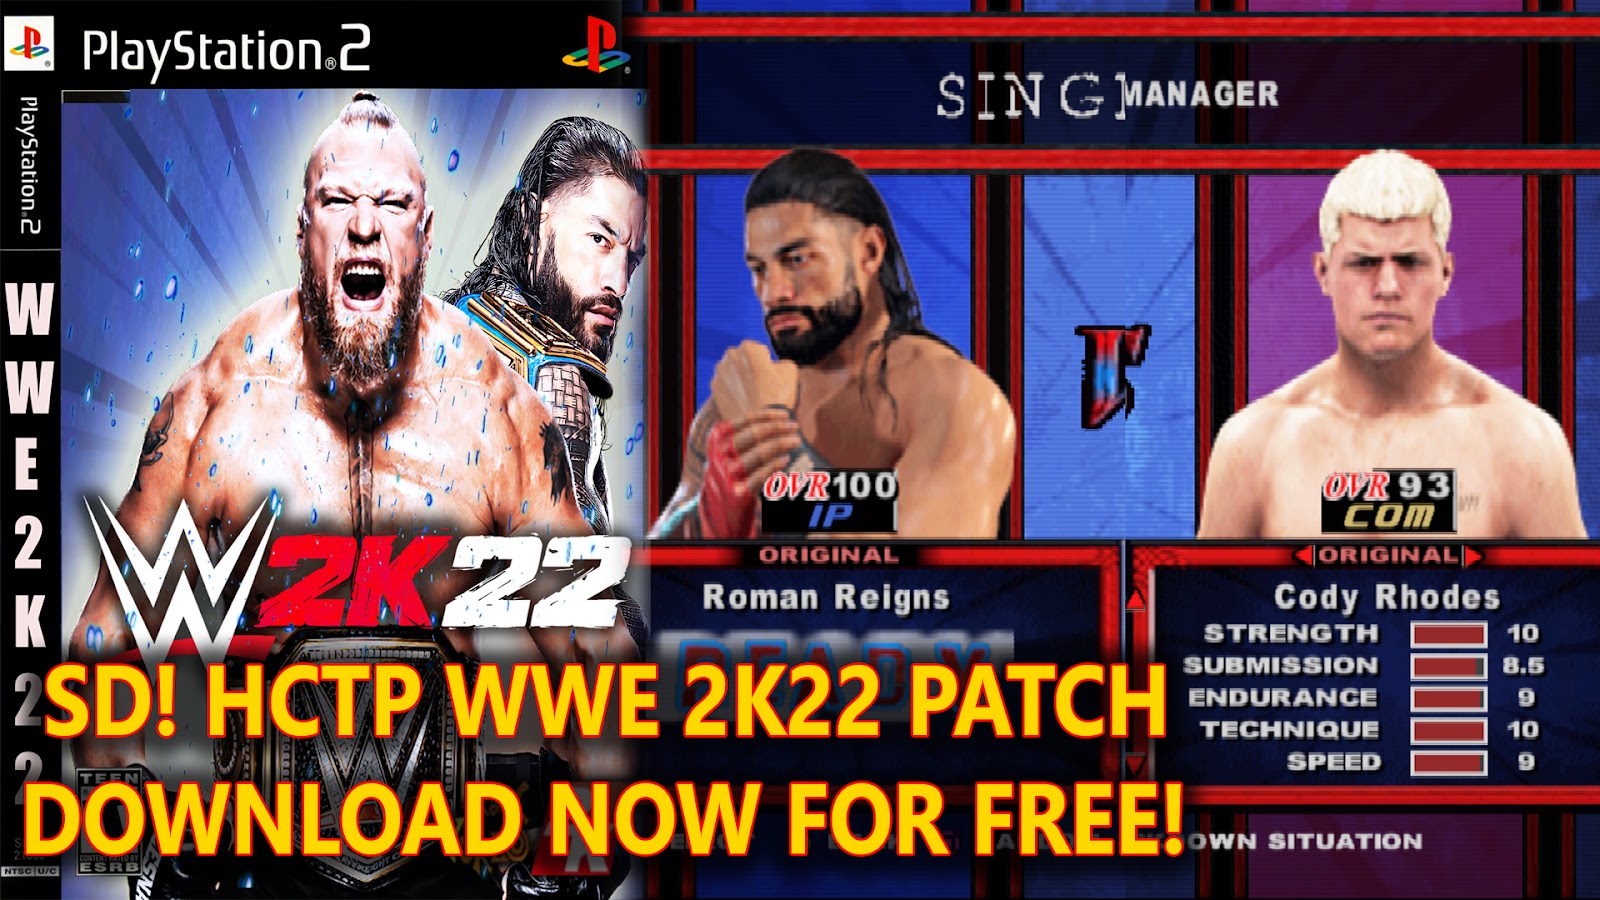 WWE SMACKDOWN! HCTP 2K22 MOD ISO Download + PCSX2 Save & Cheats